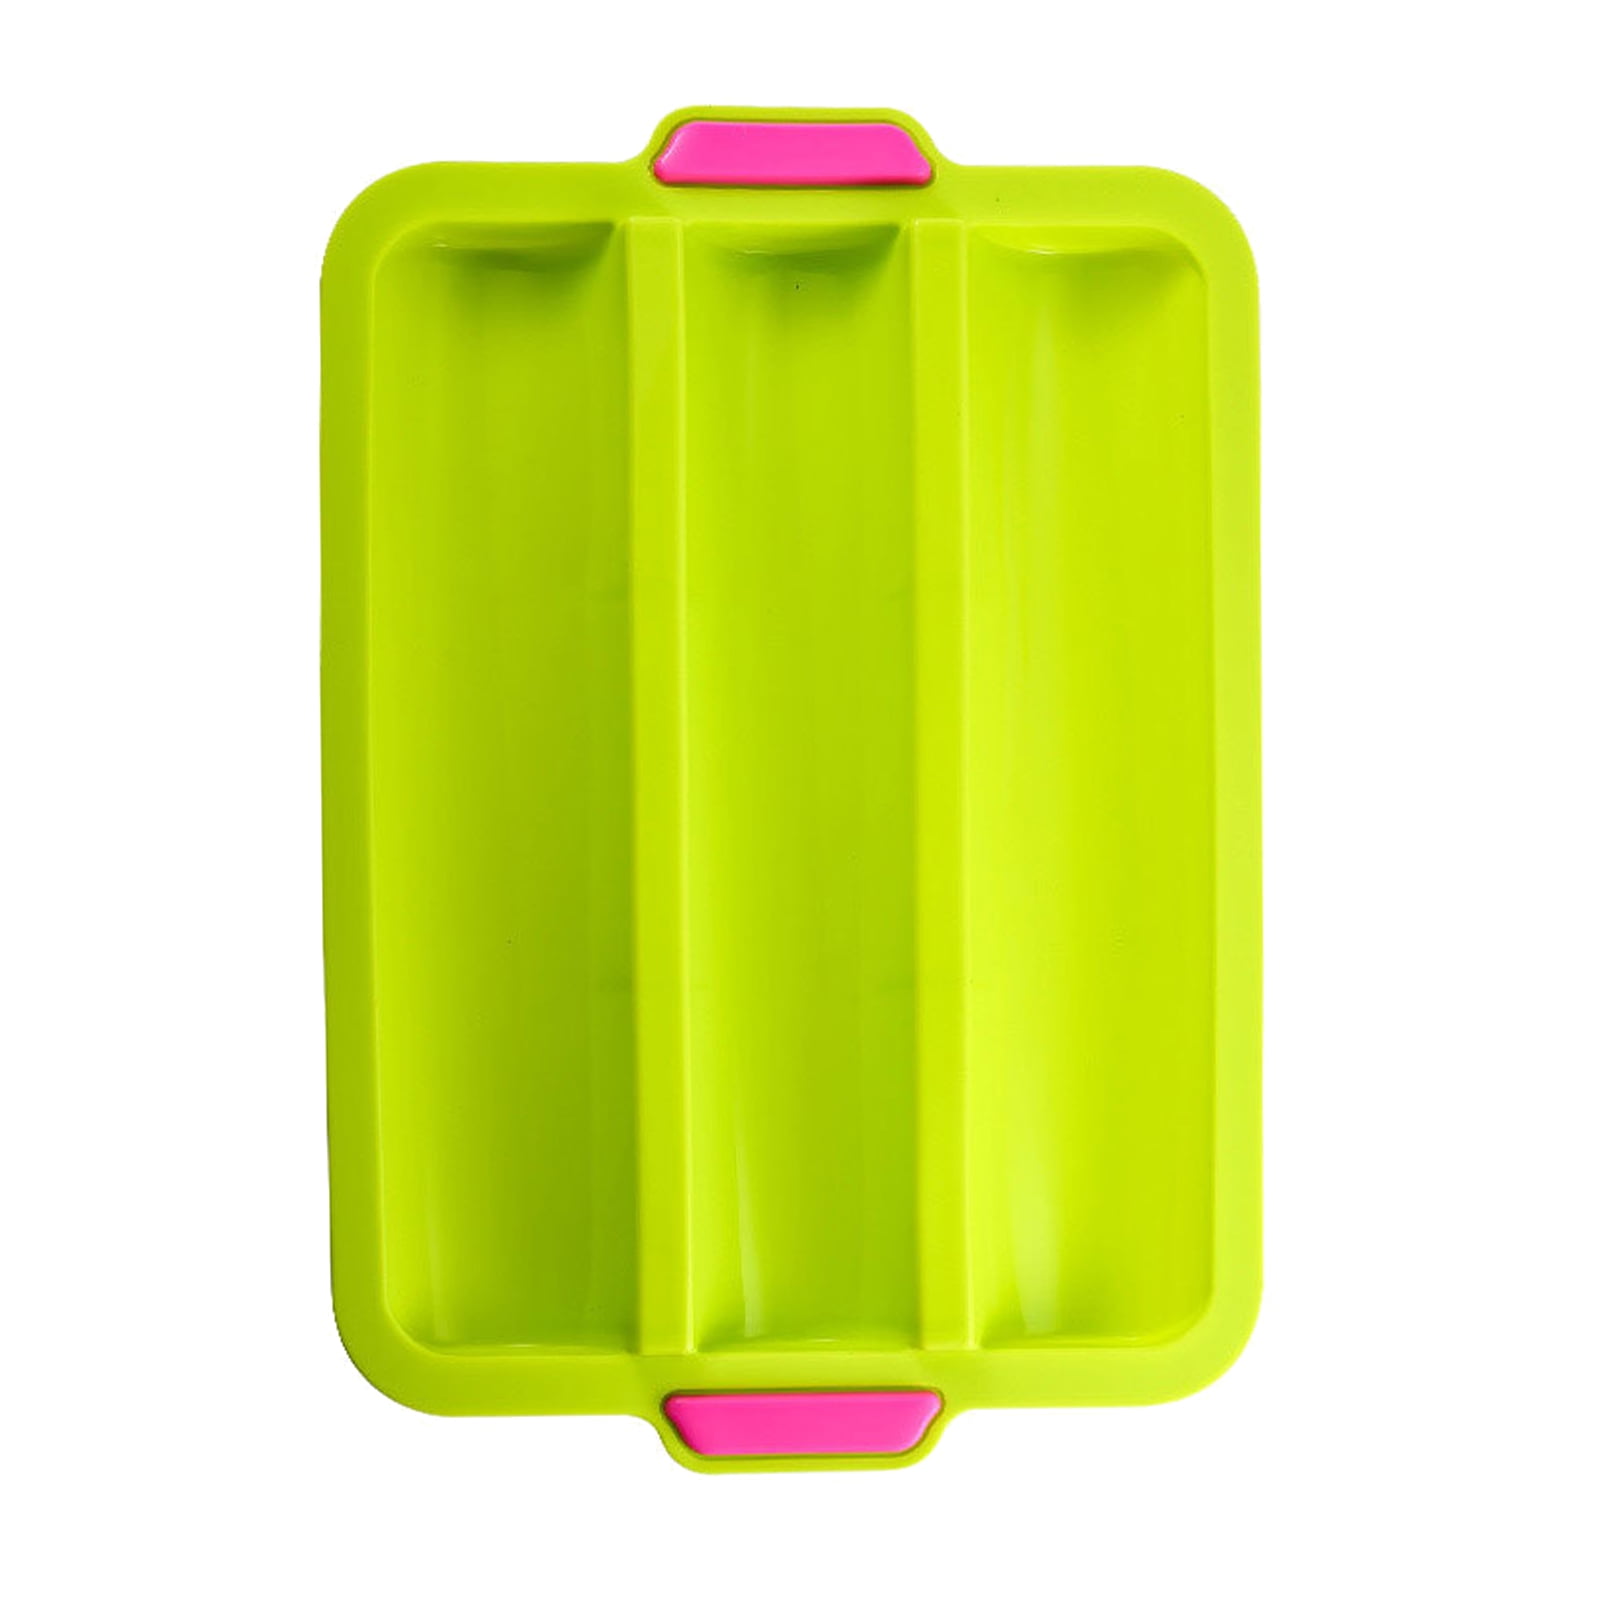 Details about   Silicone Baking Cake Pan Bread Molds Square BPA Free Non Stick DIY Bakeware 